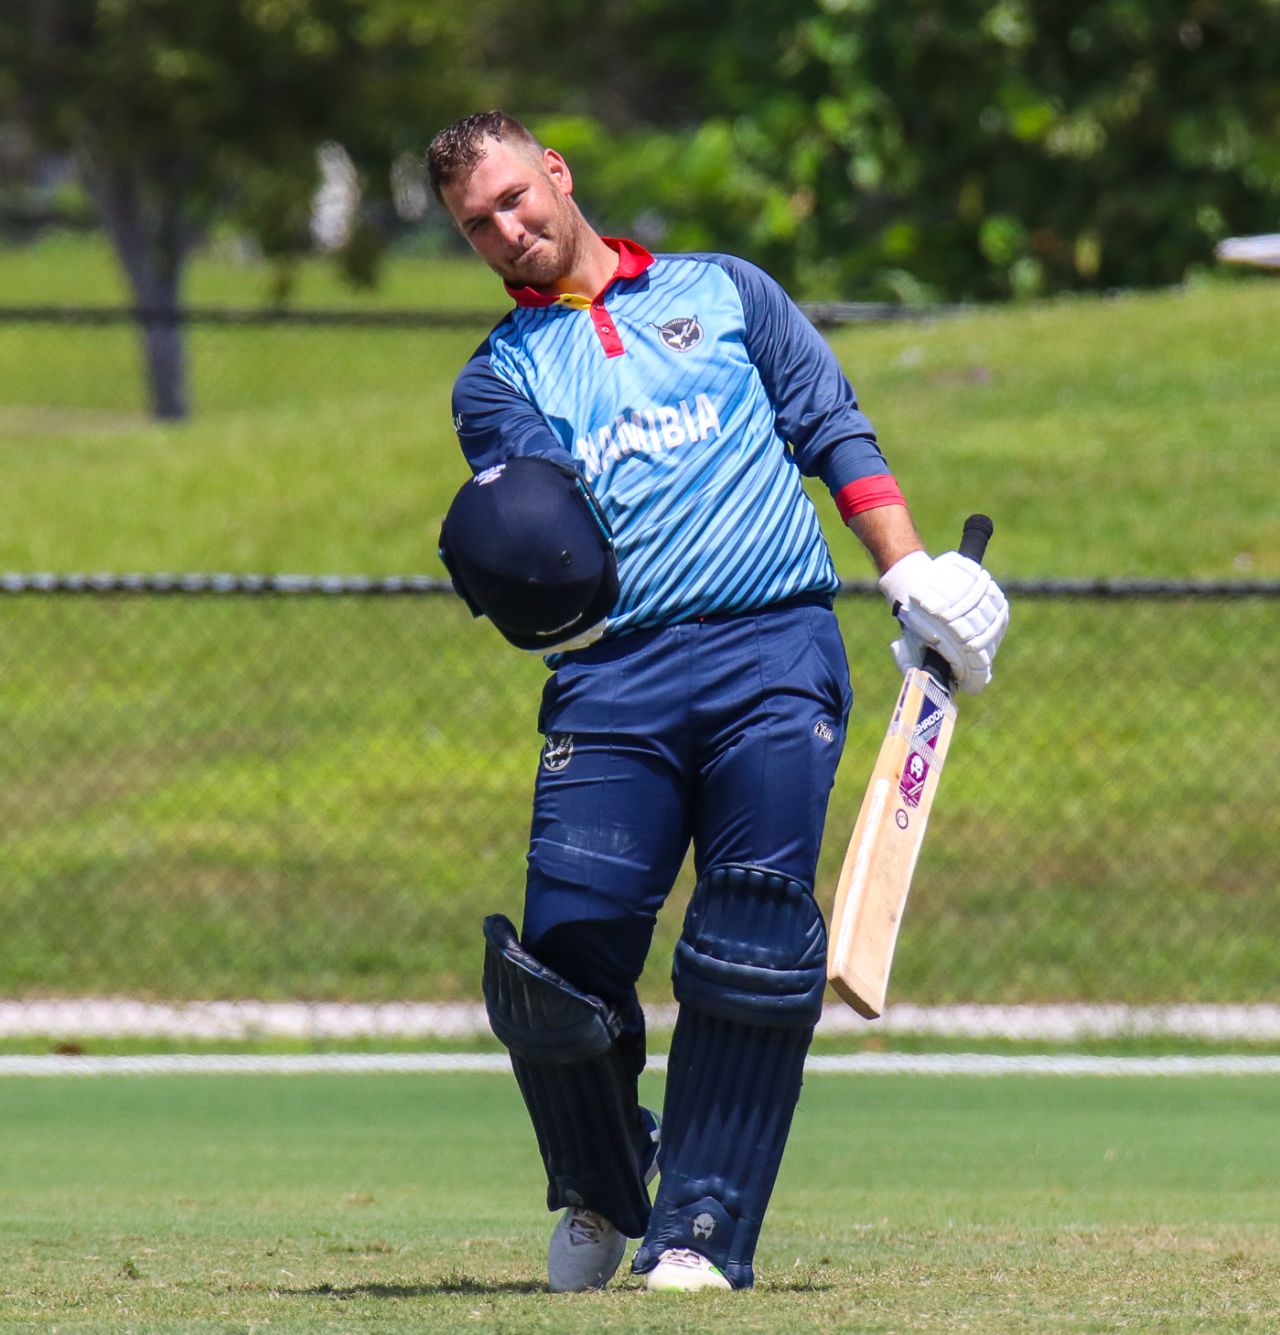 JP Kotze pumps his first after scoring Namibia's maiden ODI century, USA v Namibia, Cricket World Cup League Two, Lauderhill, September 20, 2019